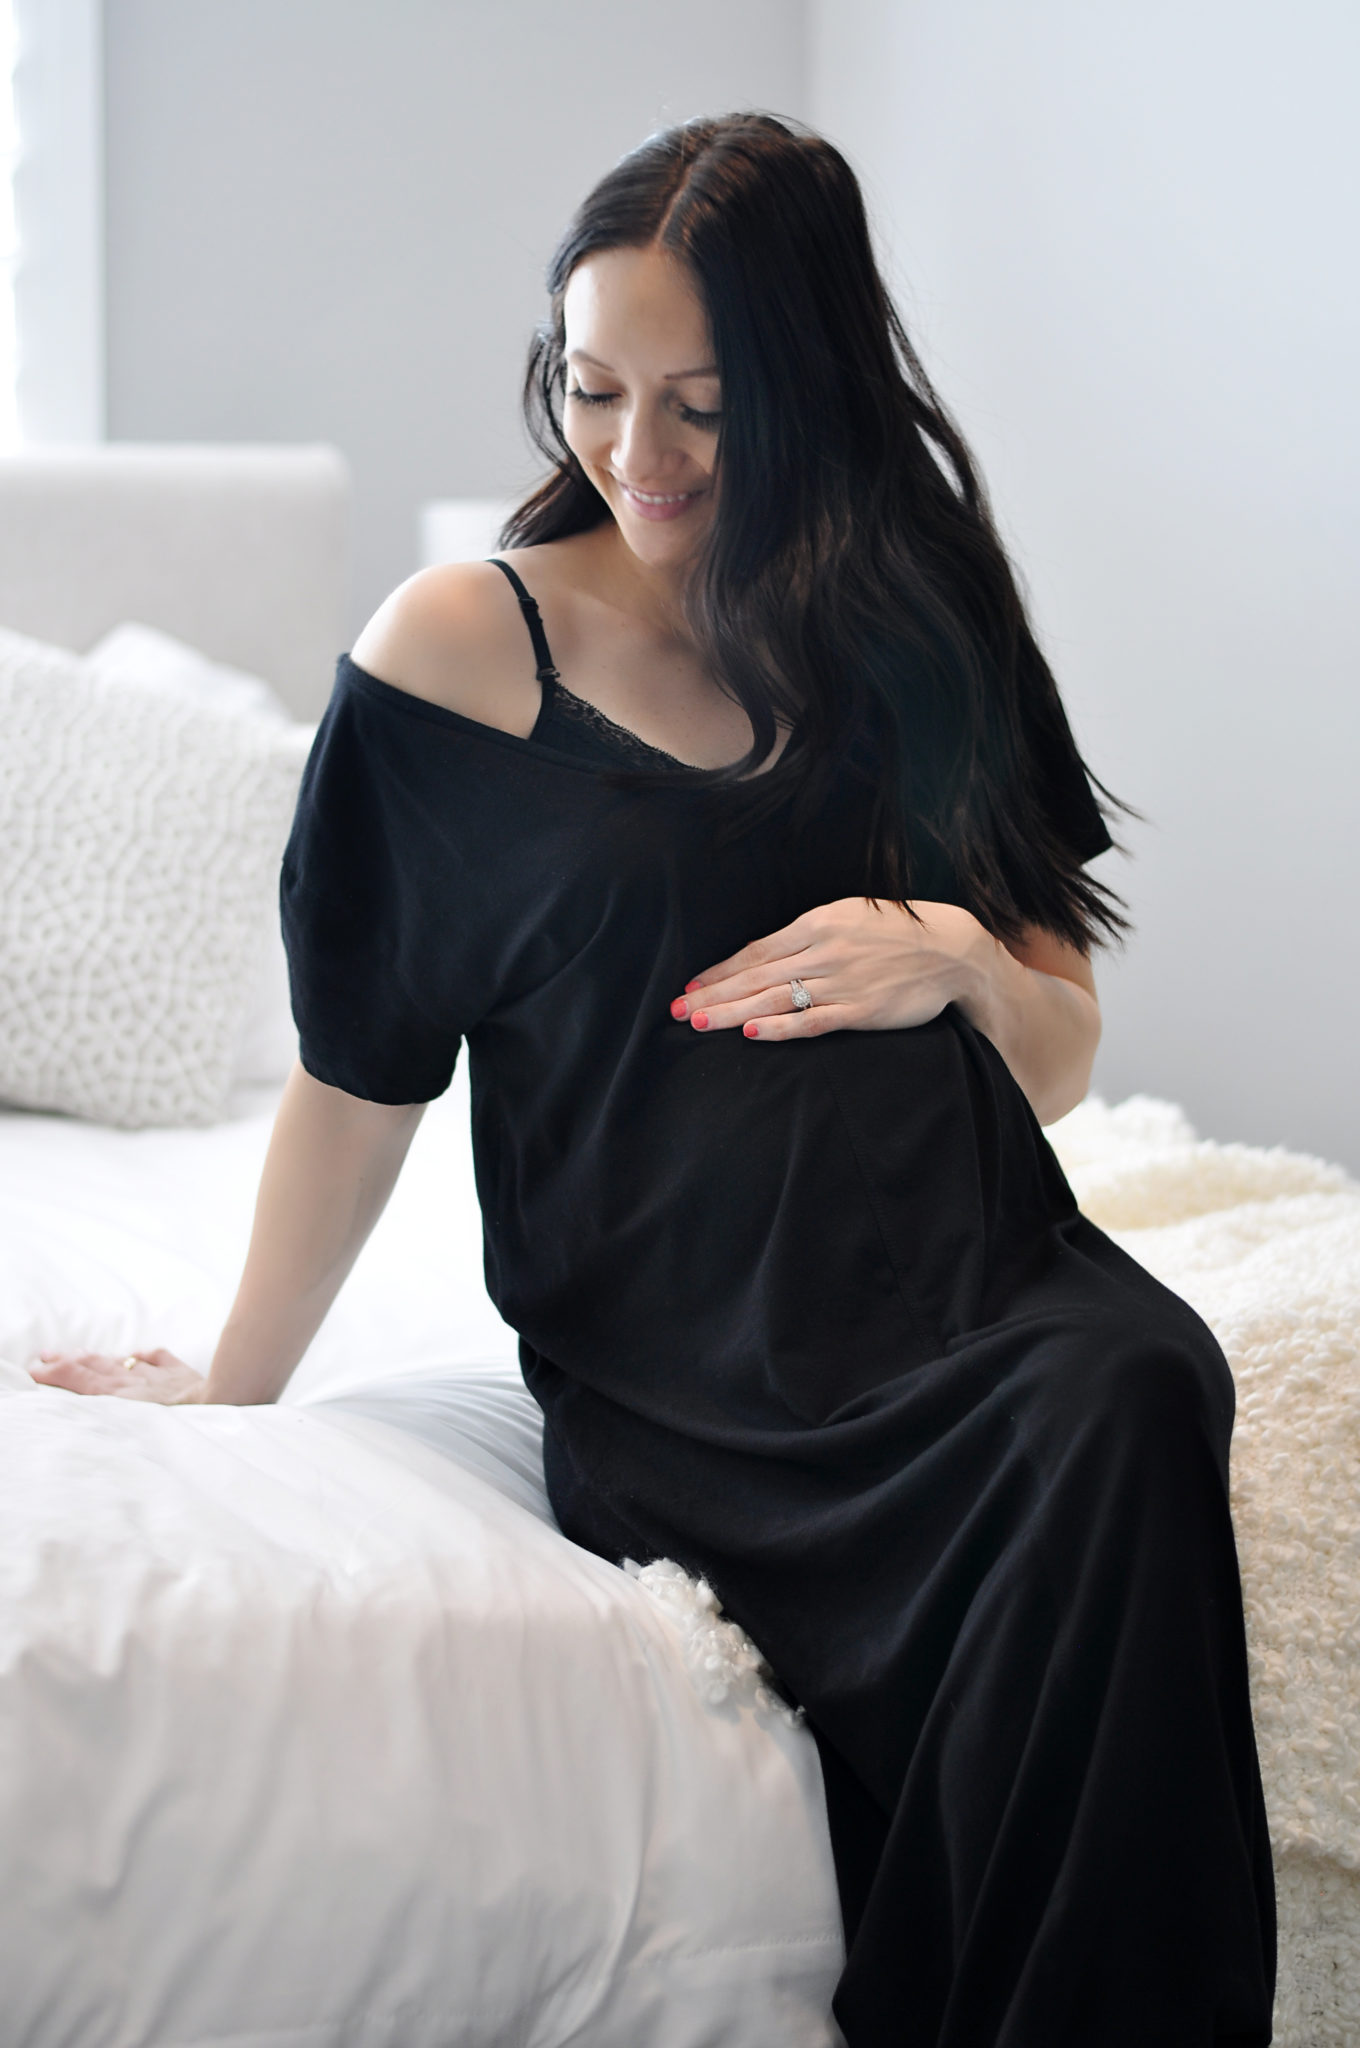 The Best Nursing Bra by popular Las Vegas fashion blogger and expecting mom Outfits & Outings